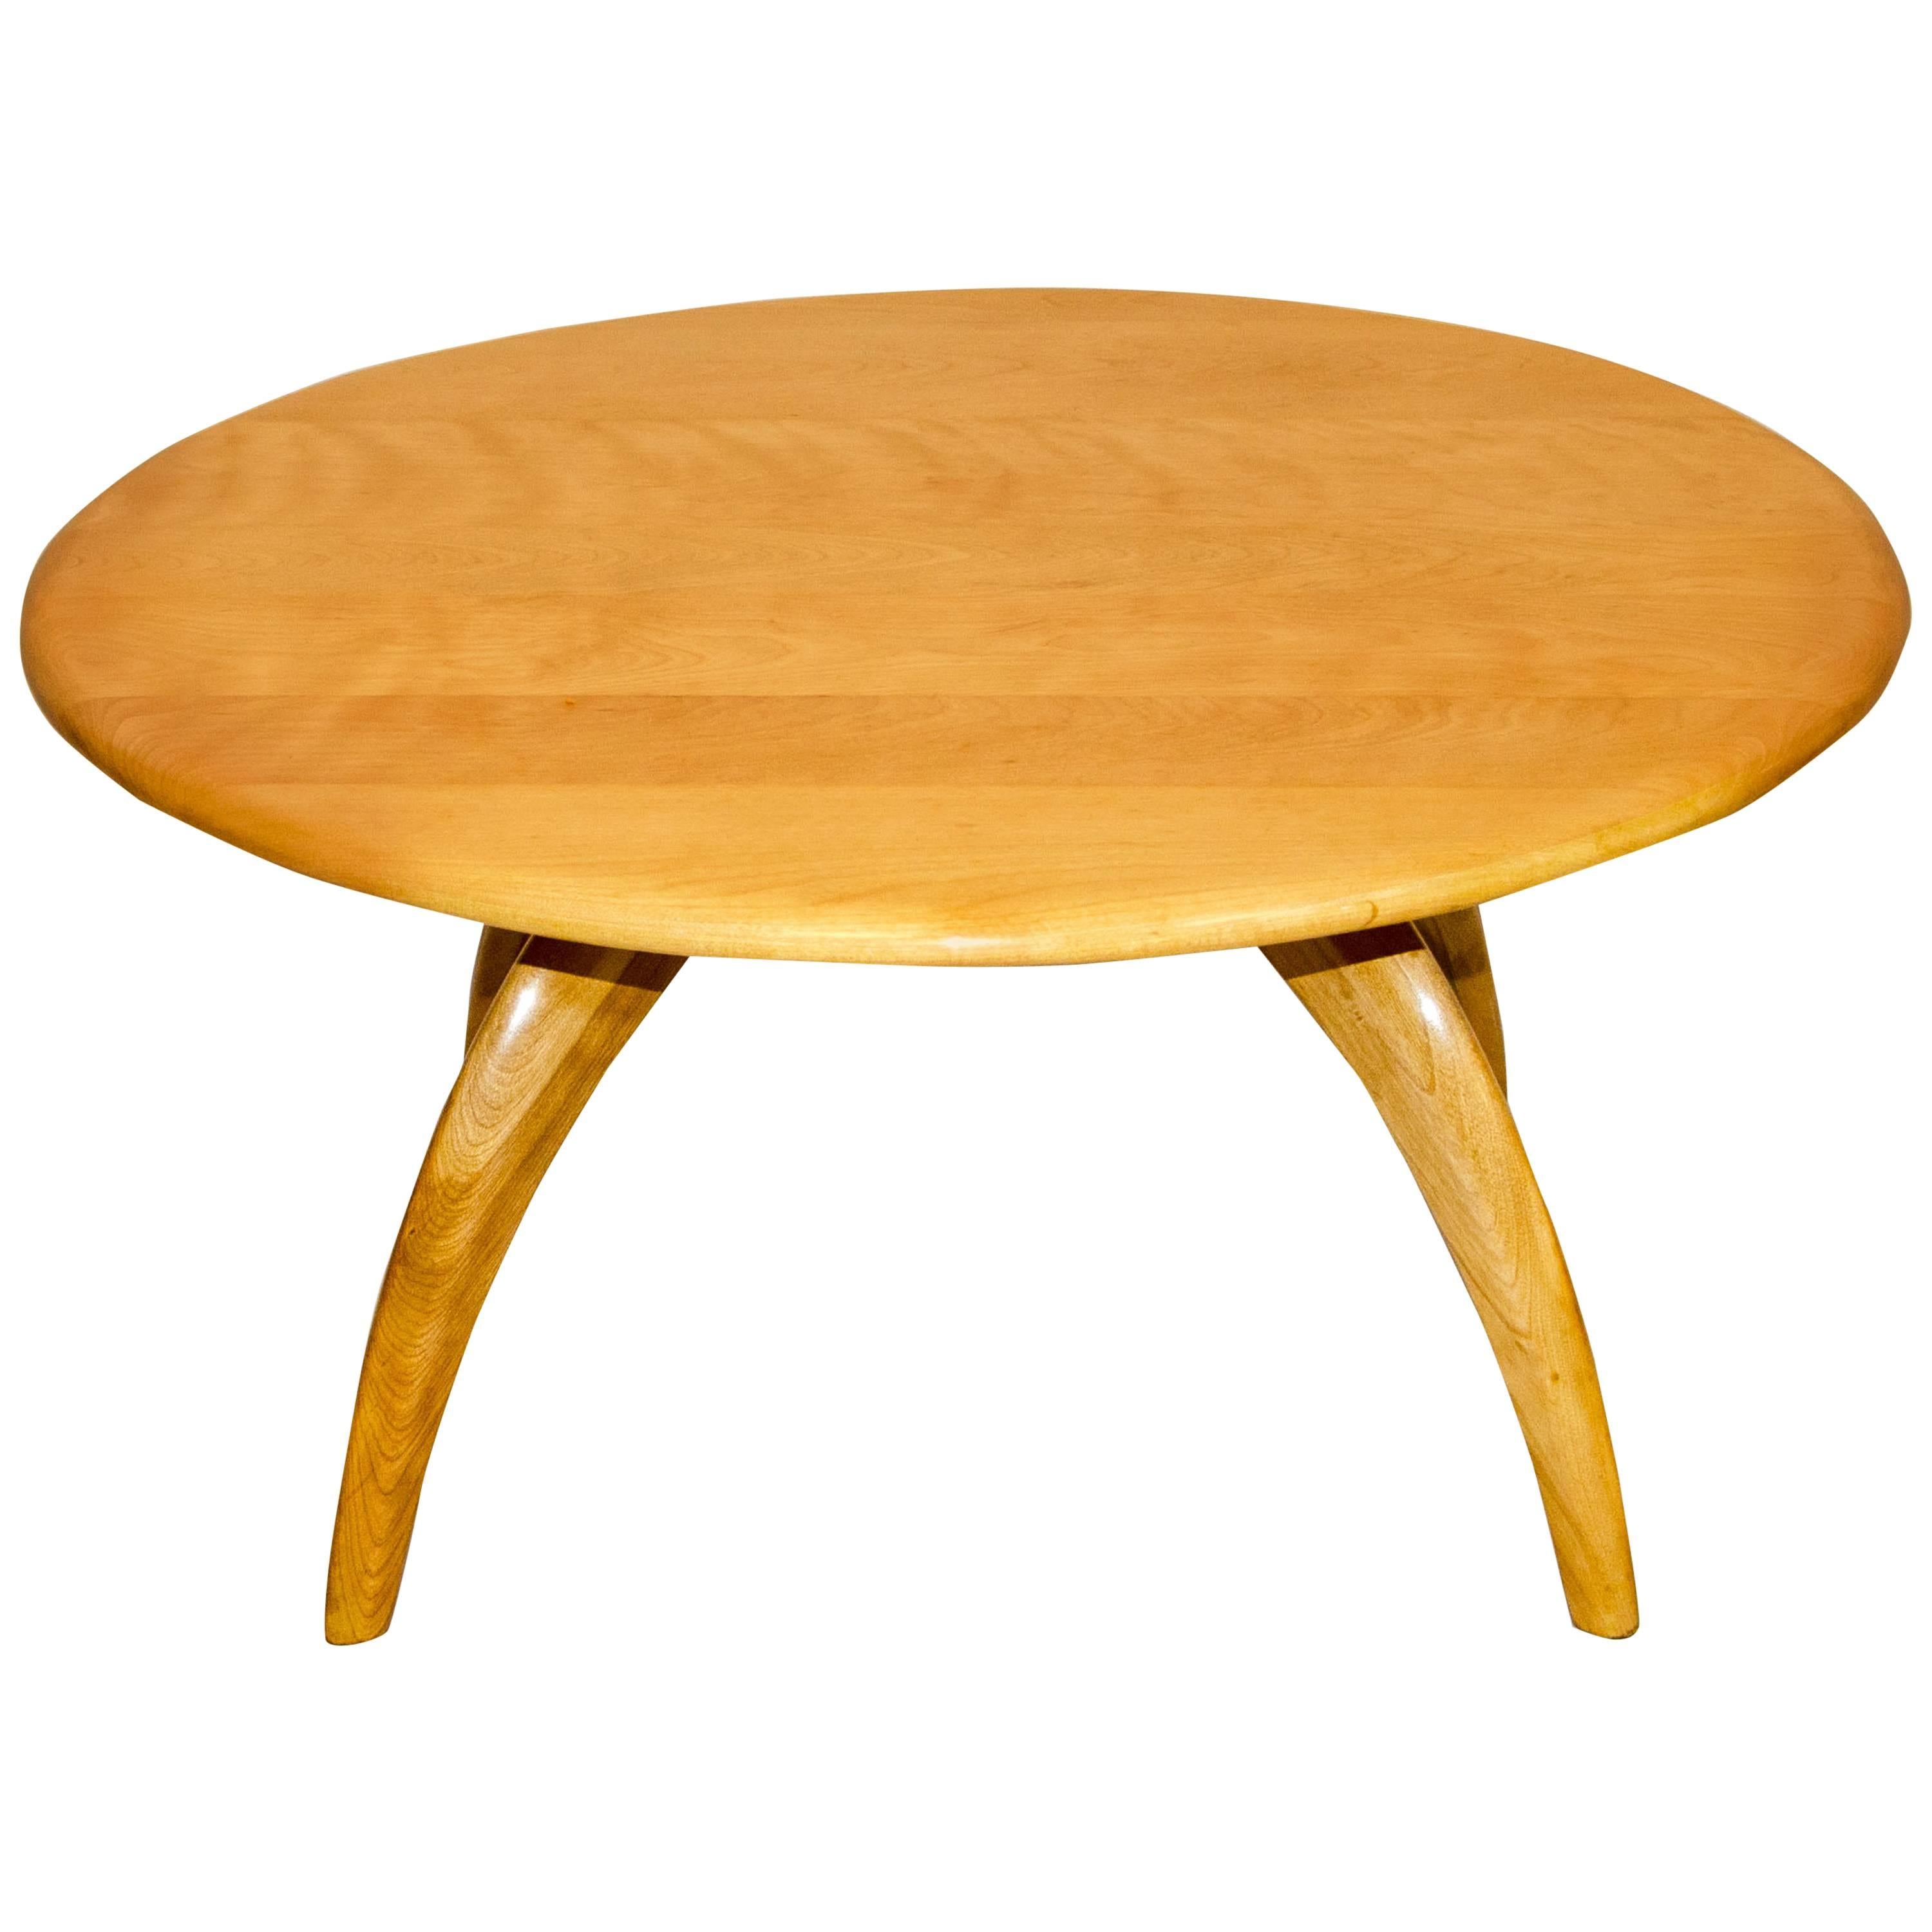 This is a very popular cocktail table that the Heywood Wakefield Co. manufactured for quite a few years. It has the signature 